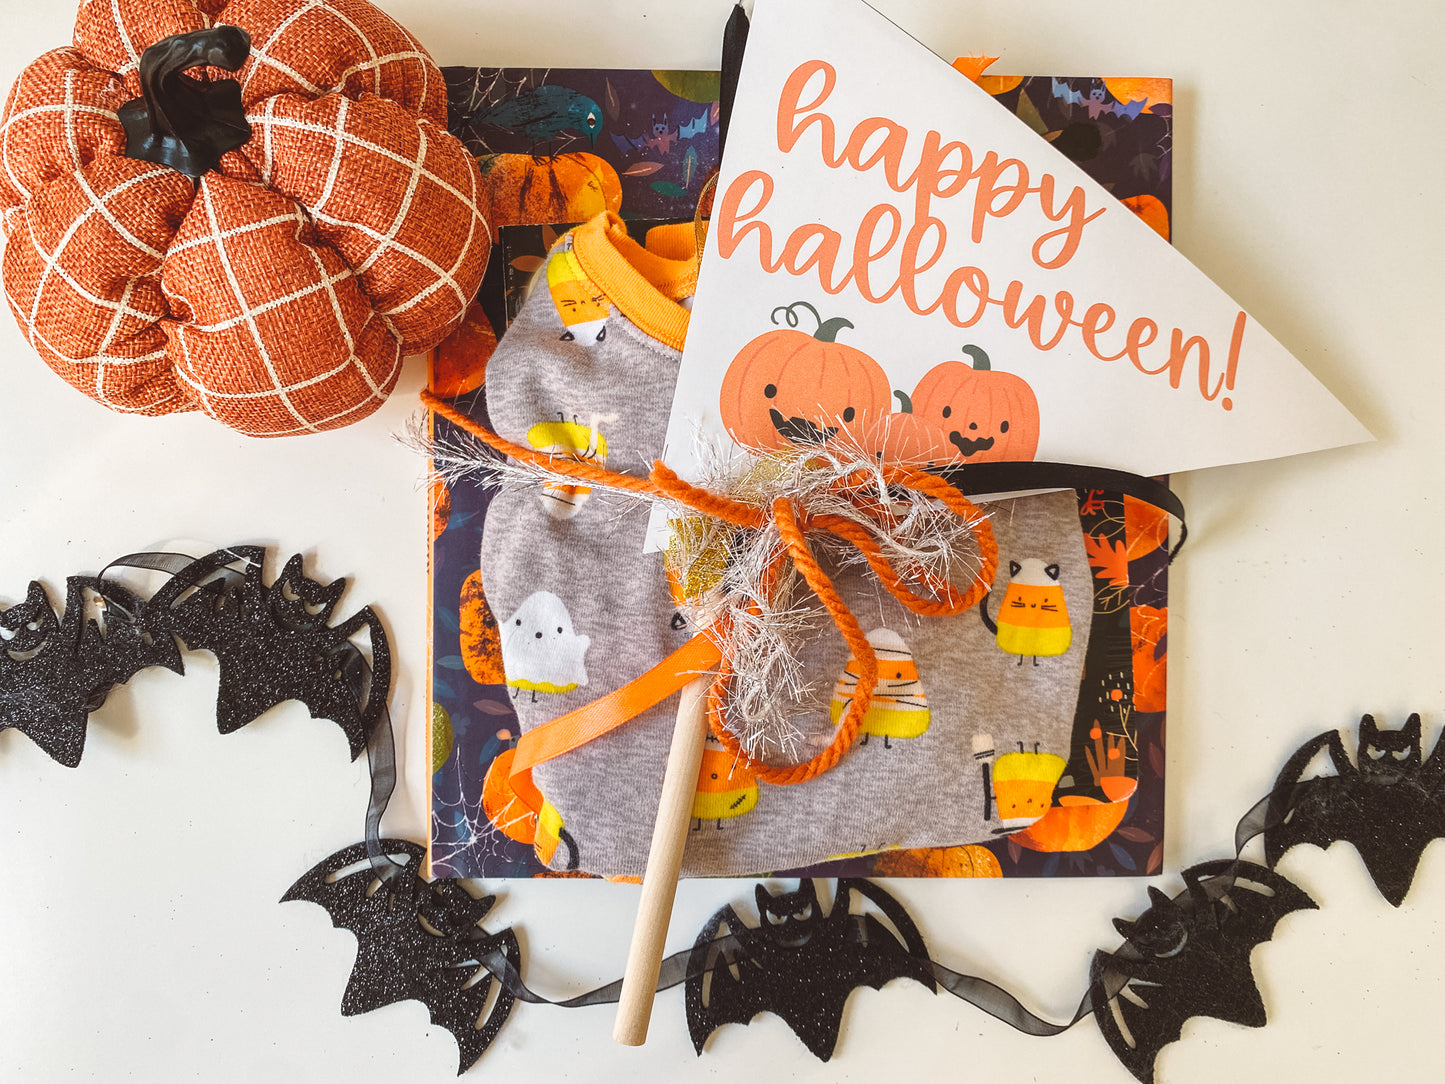 Happy Halloween pennant flag is white with orange text and three orange pumpkins below. Placed on top of a set of Halloween pjs and book. Orange pumpkin and black bat garland complete the flat lay.